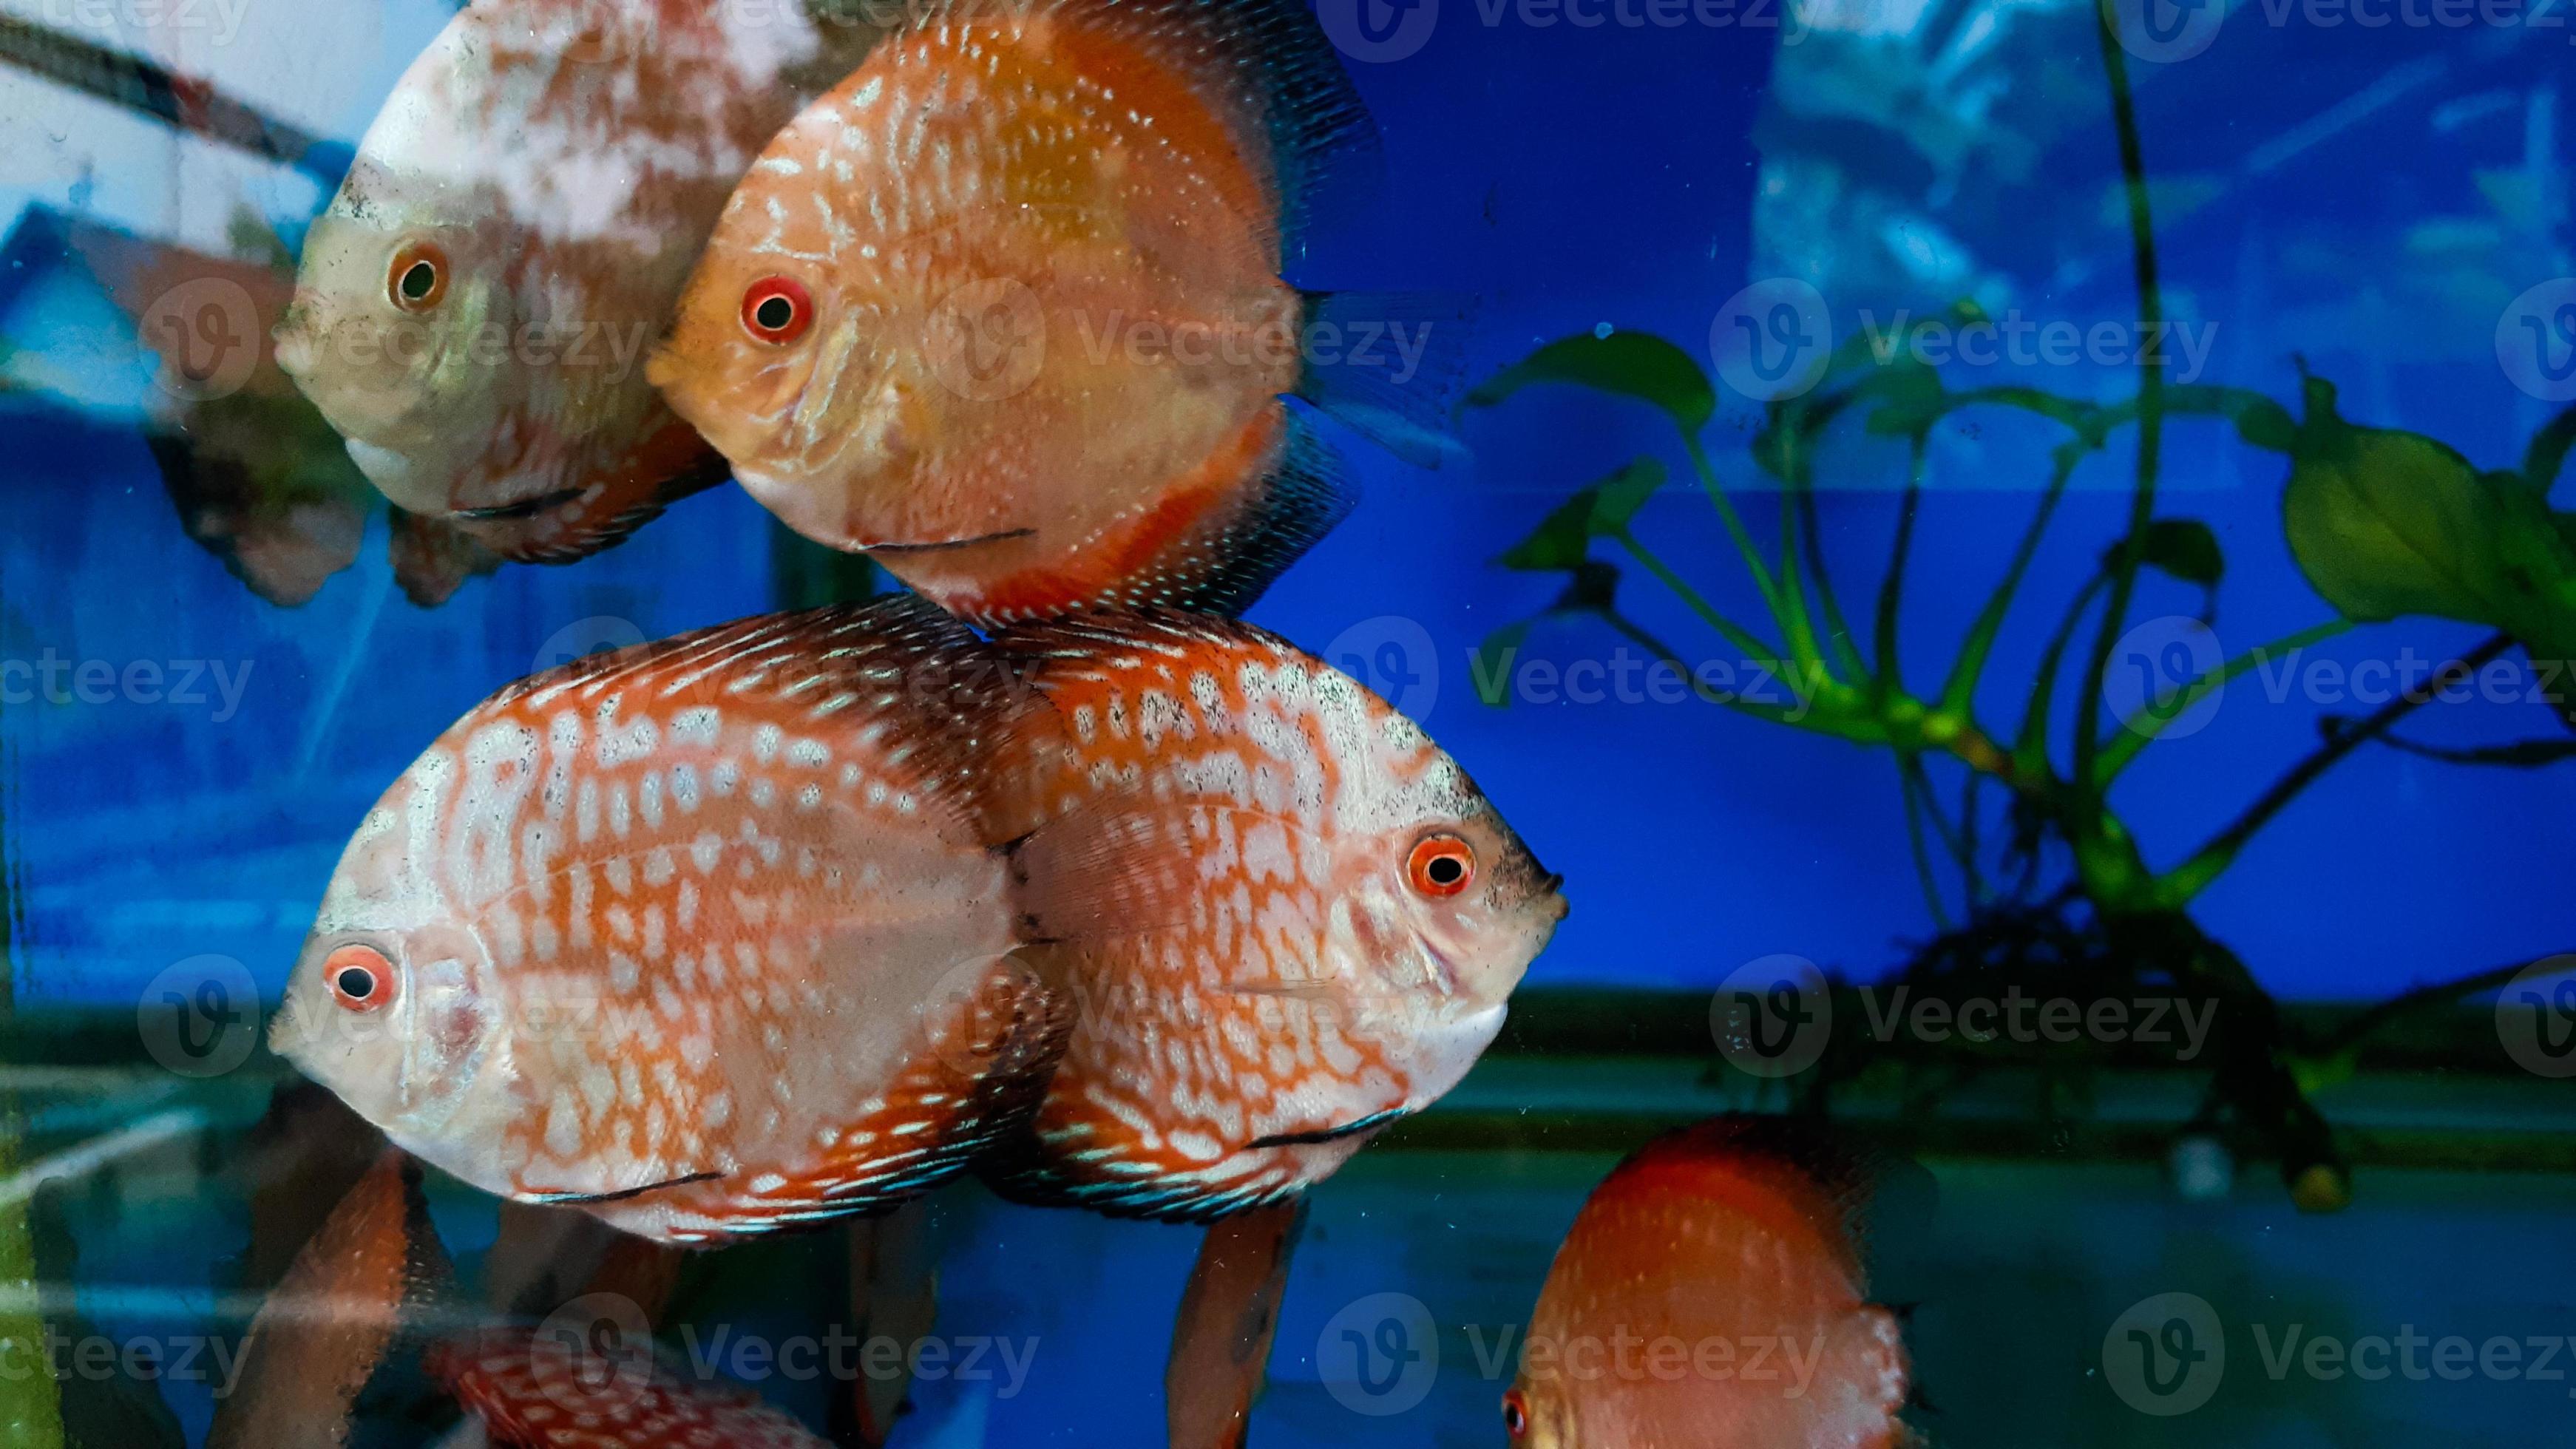 https://static.vecteezy.com/system/resources/previews/015/468/388/large_2x/discus-fish-in-aquarium-tropical-fish-symphysodon-discus-from-amazon-river-blue-diamond-snakeskin-red-turquoise-and-more-photo.jpg